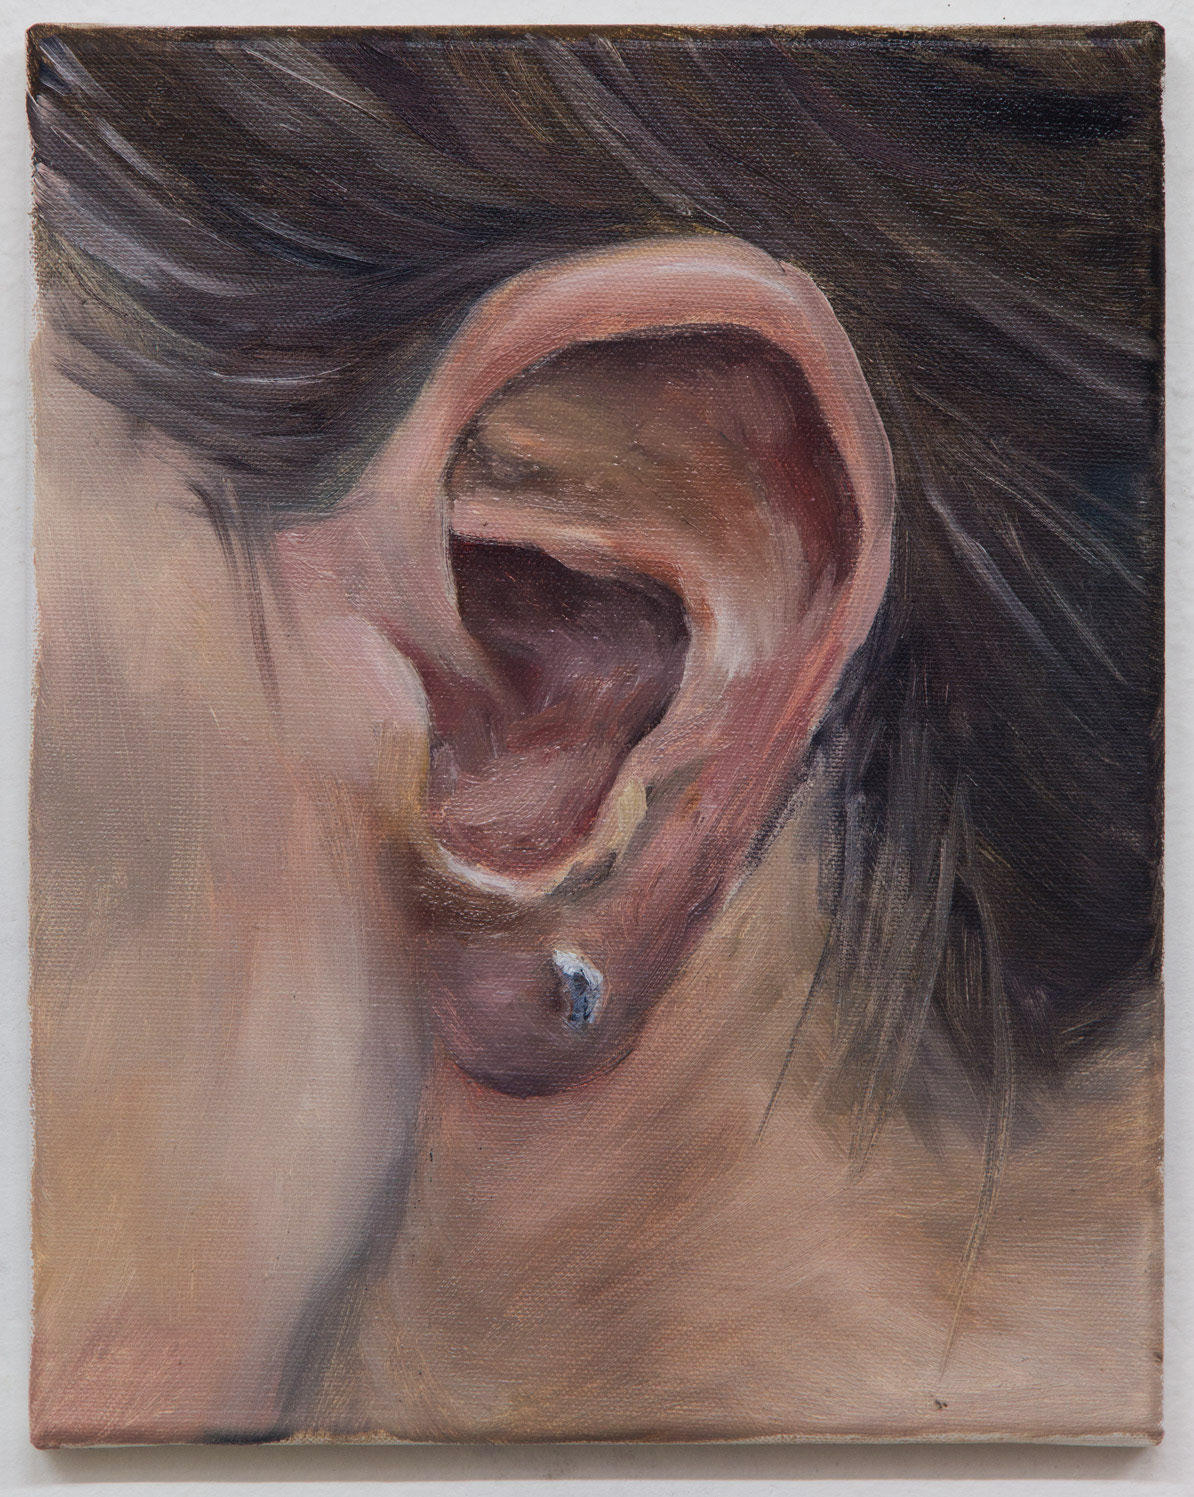 From the "Ear Collection"; 24 x 30 cm; oil on canvas; 2018